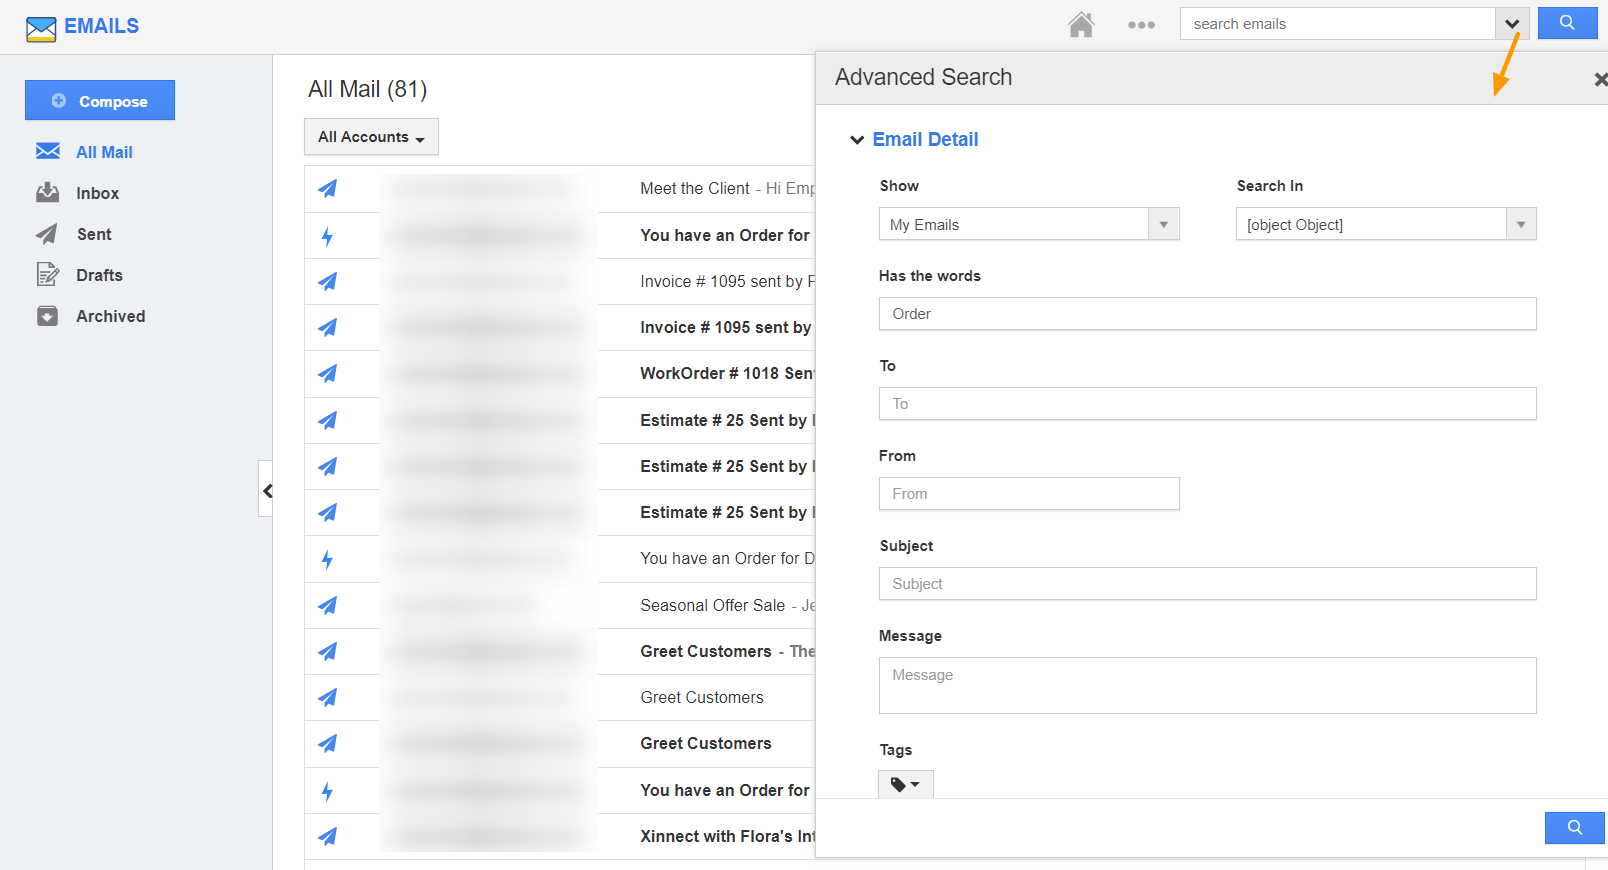 EmailsApp-AdvancedSearch.png